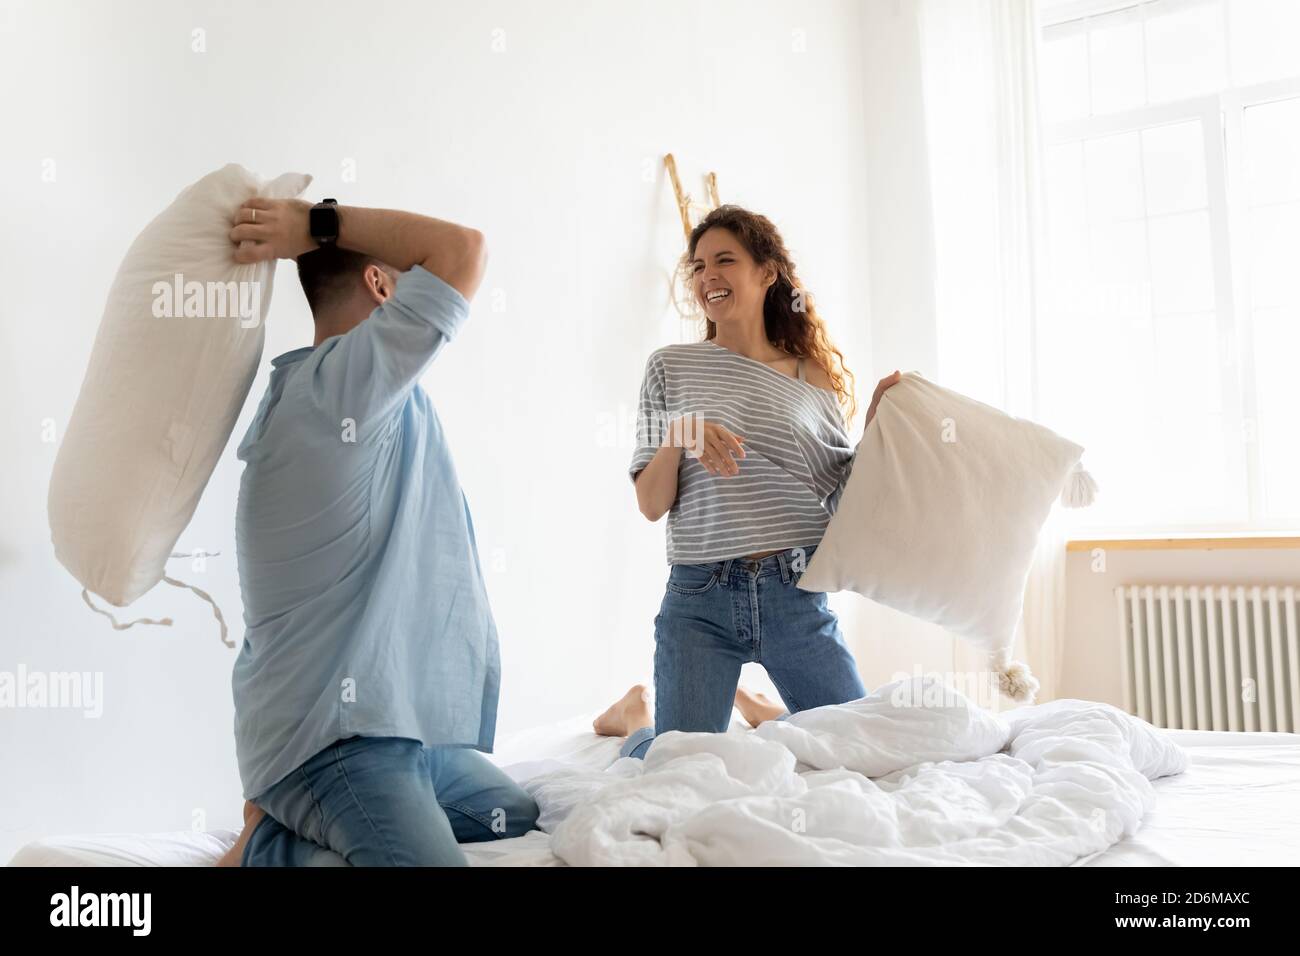 Happy laughing young couple playing pillow fight in bedroom Stock Photo